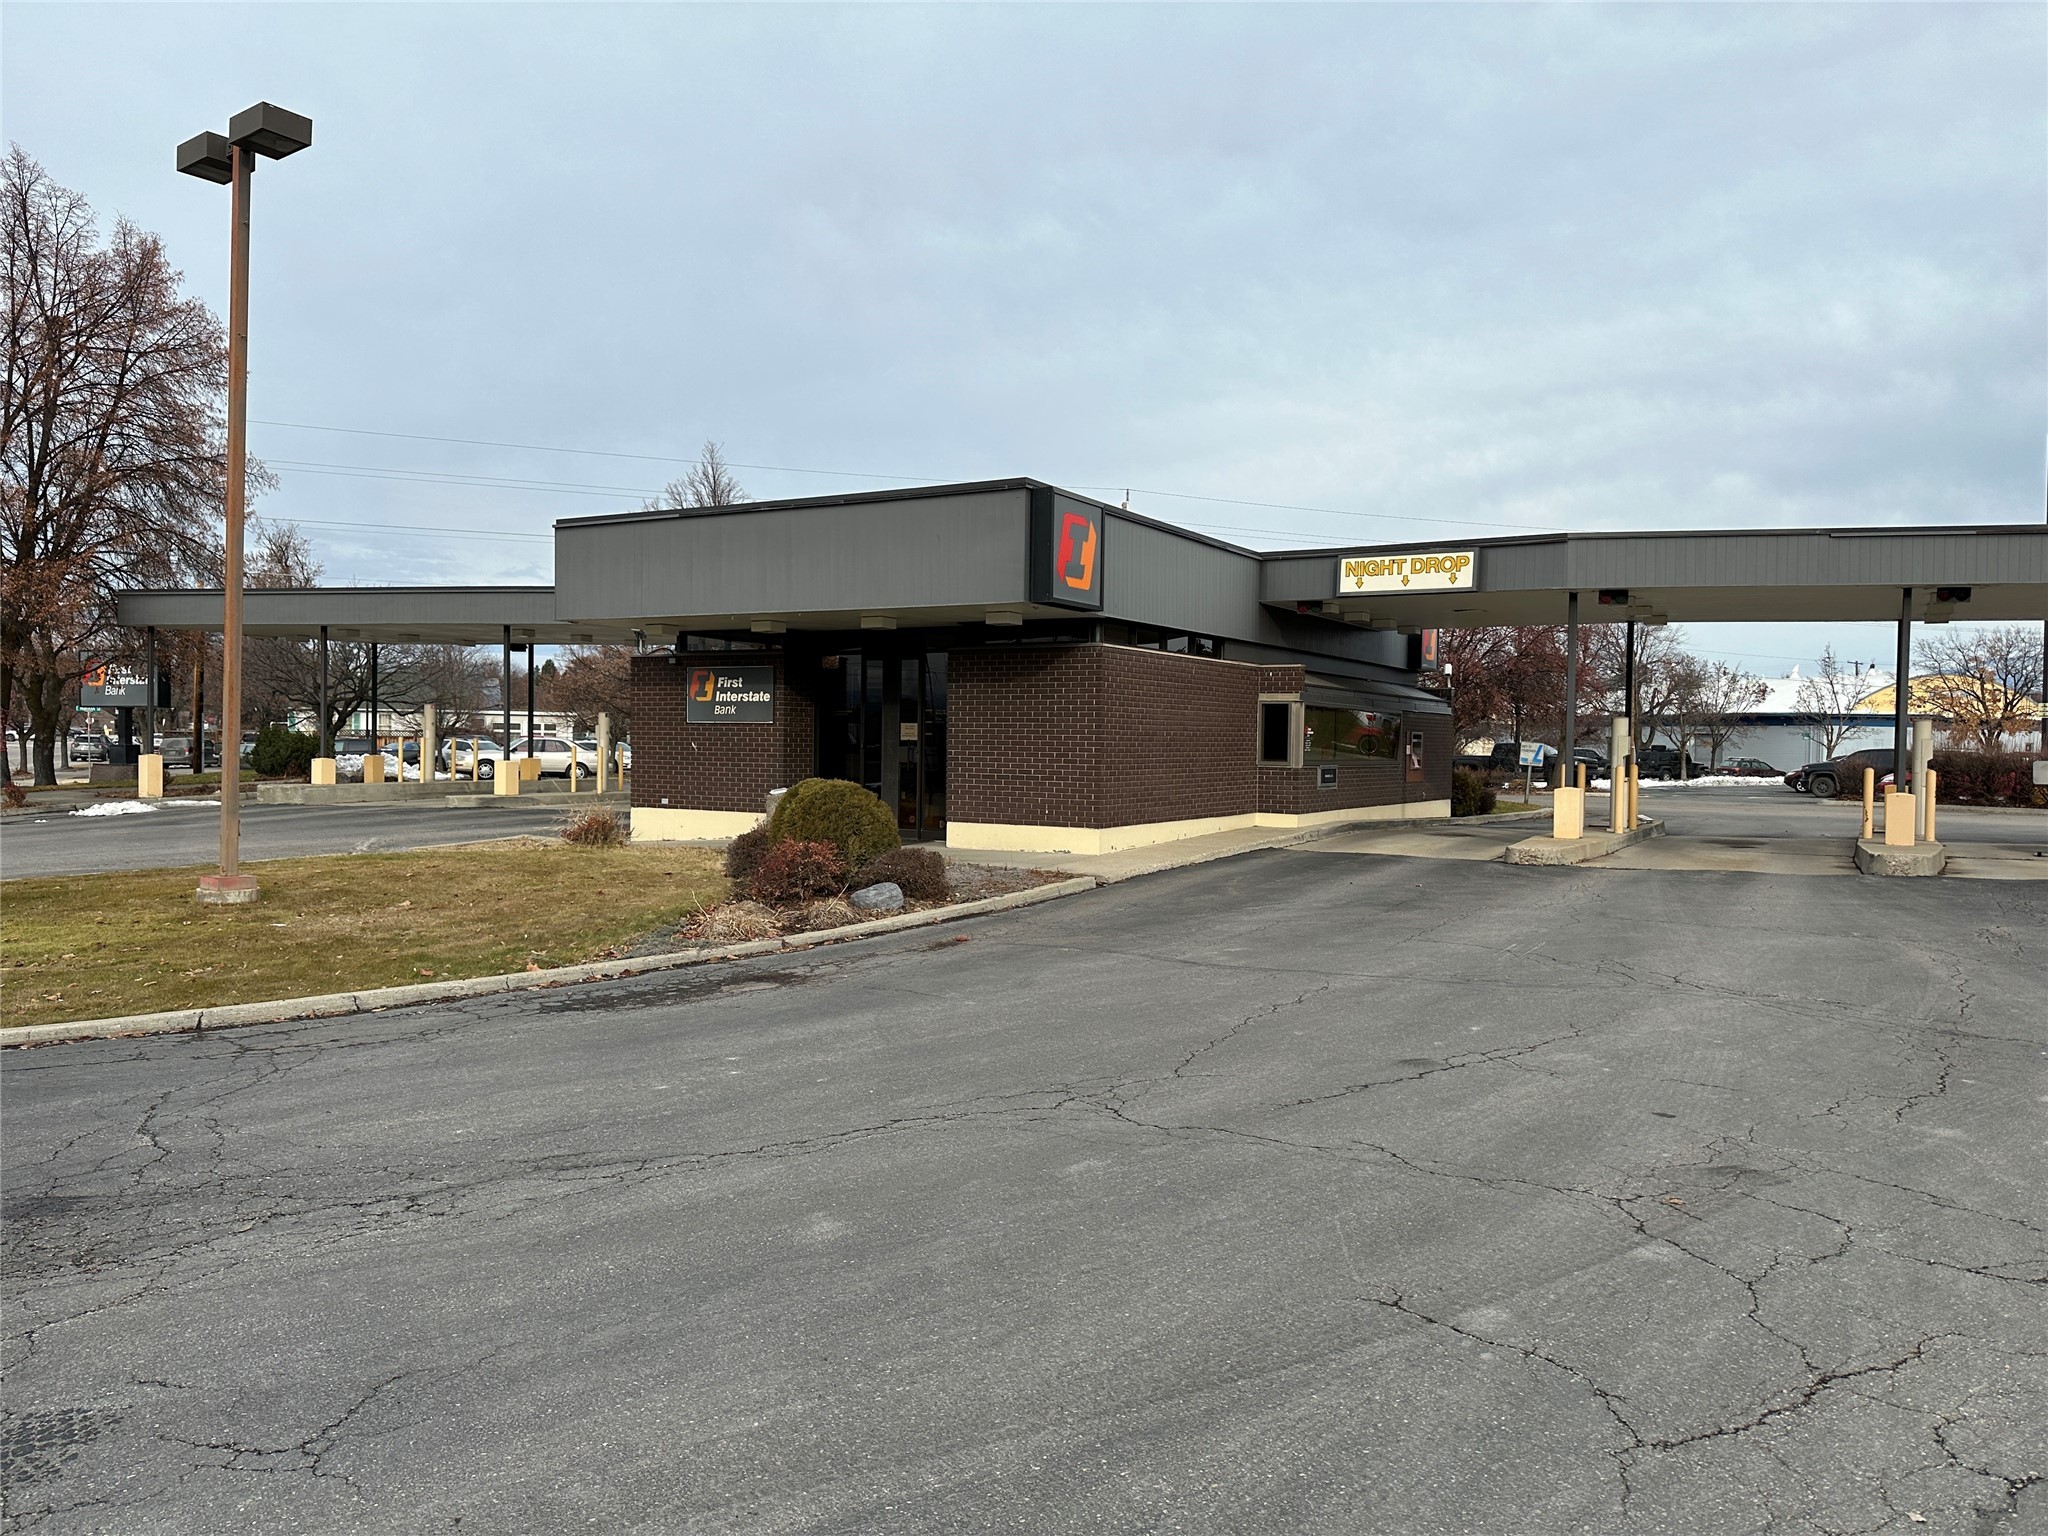 Unique opportunity for a short-term lease at the heart of Kalispell’s Central Business District, complete with eight drive-through lanes. This 1,076-square-foot former bank drive-through is available through late 2024. Building includes a lobby area, open work space, kitchenette, and one bathroom. Sited on prime lot next to Super One grocery store. Great access, parking and visibility. Great location for short-term office needs. $16/sf/yr ~$1435/mo + NNNs.  Call David Stone at 406-250-7249, or your real estate professional.